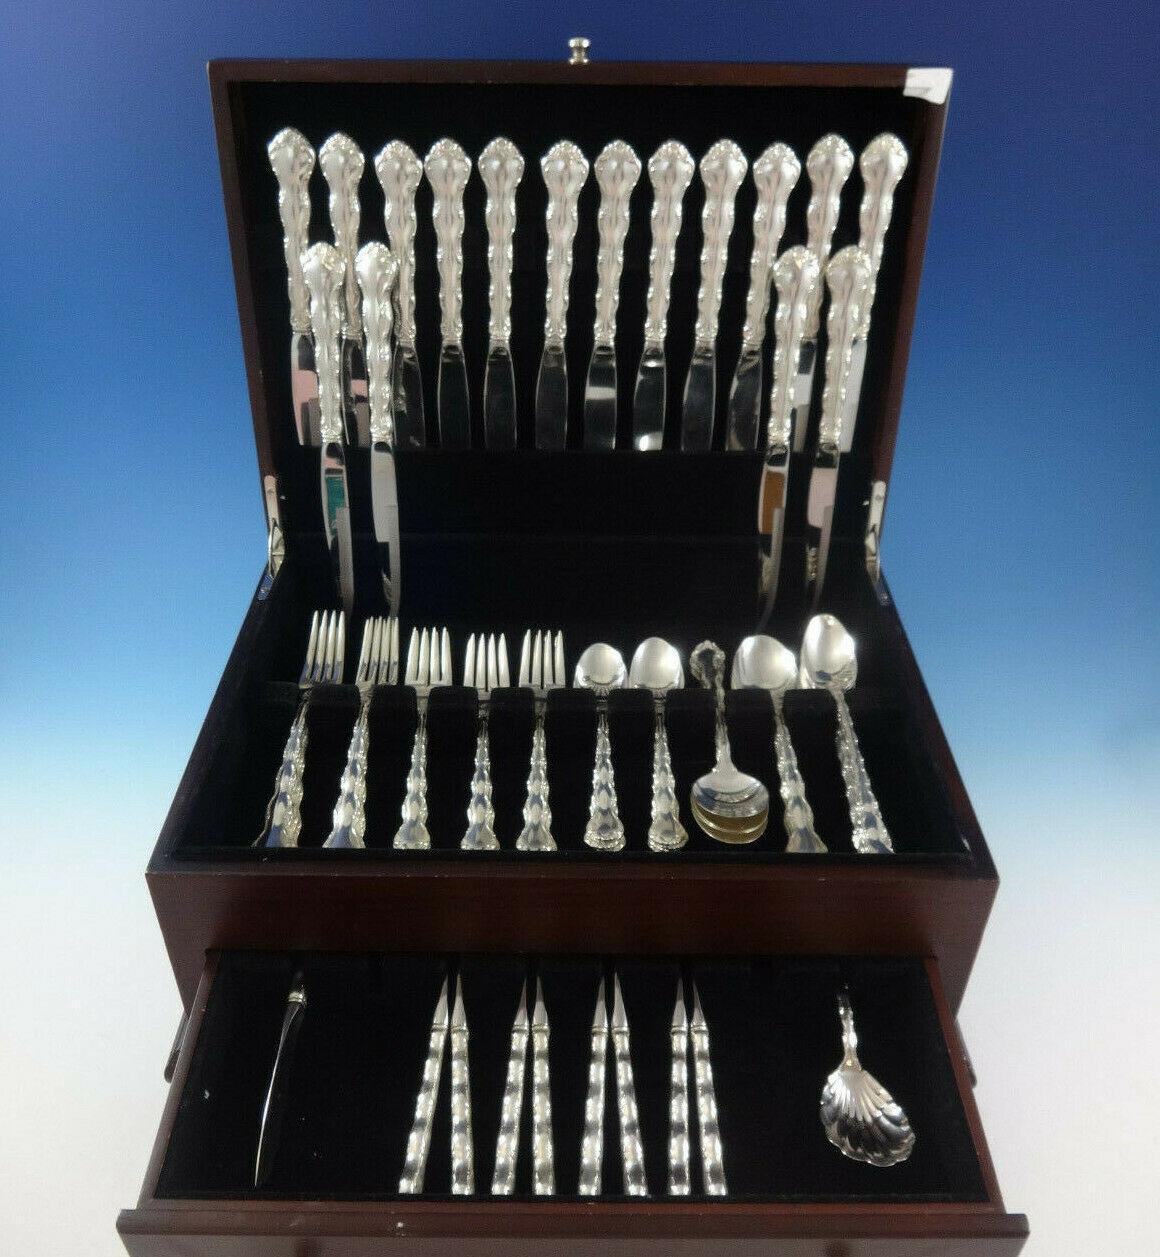 Beautiful Tara by Reed & Barton sterling silver Flatware set - 66 pieces. This set includes:

8 Knives, 9 1/8